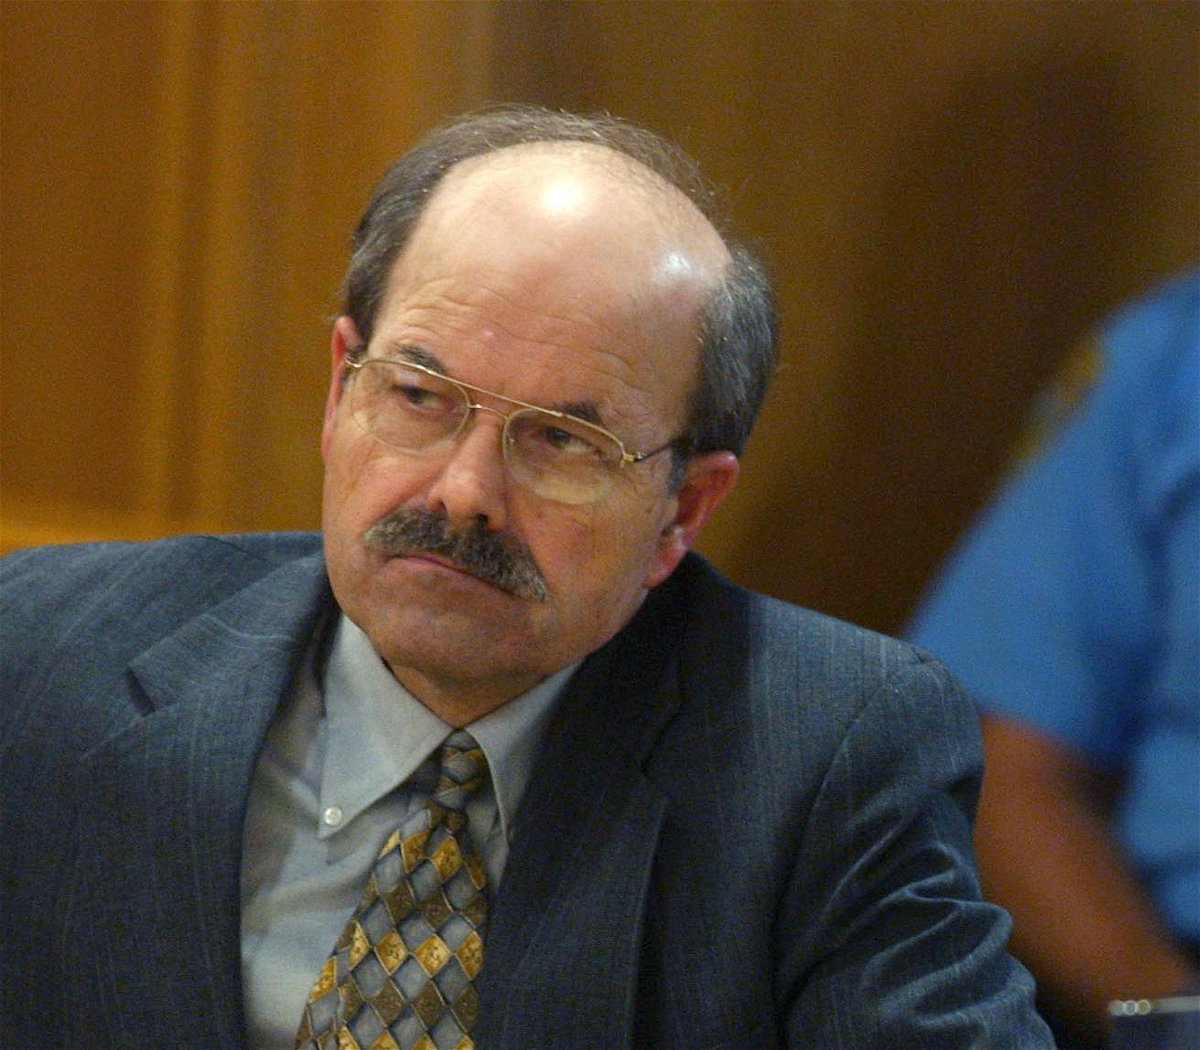 <i>Bo Rader/Pool/Getty Images</i><br/>Confessed serial killer Dennis Rader listens to testimony in the sentencing phase of his trial on August 17